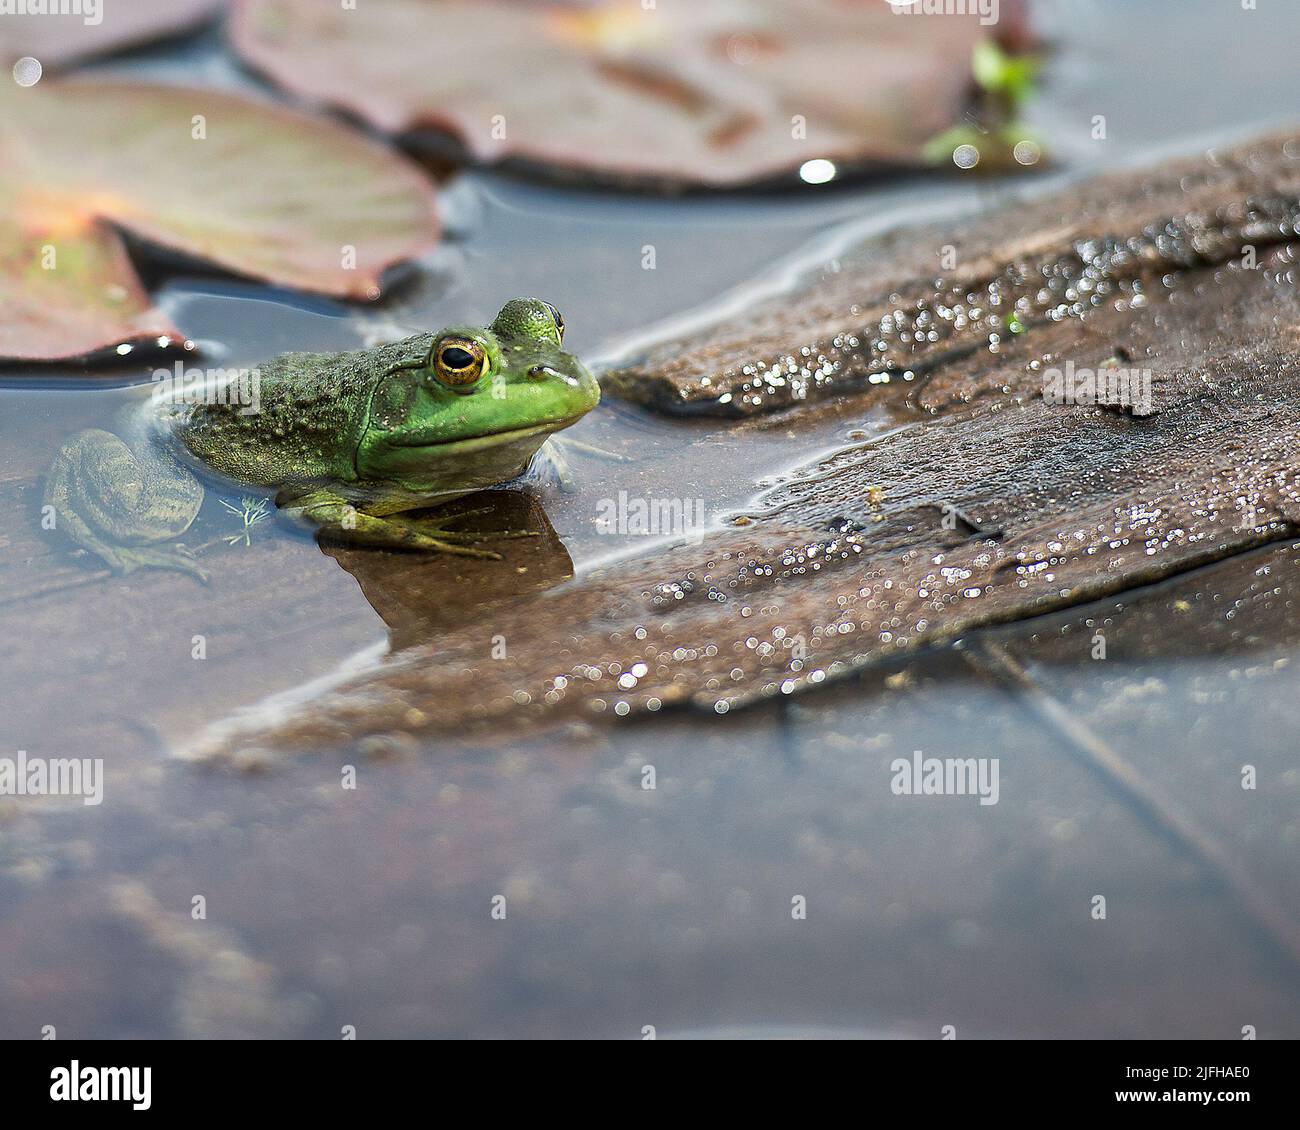 Frog sitting on a log in the water exposing its body, head, legs, eye and enjoying its environment and surrounding, Stock Photo